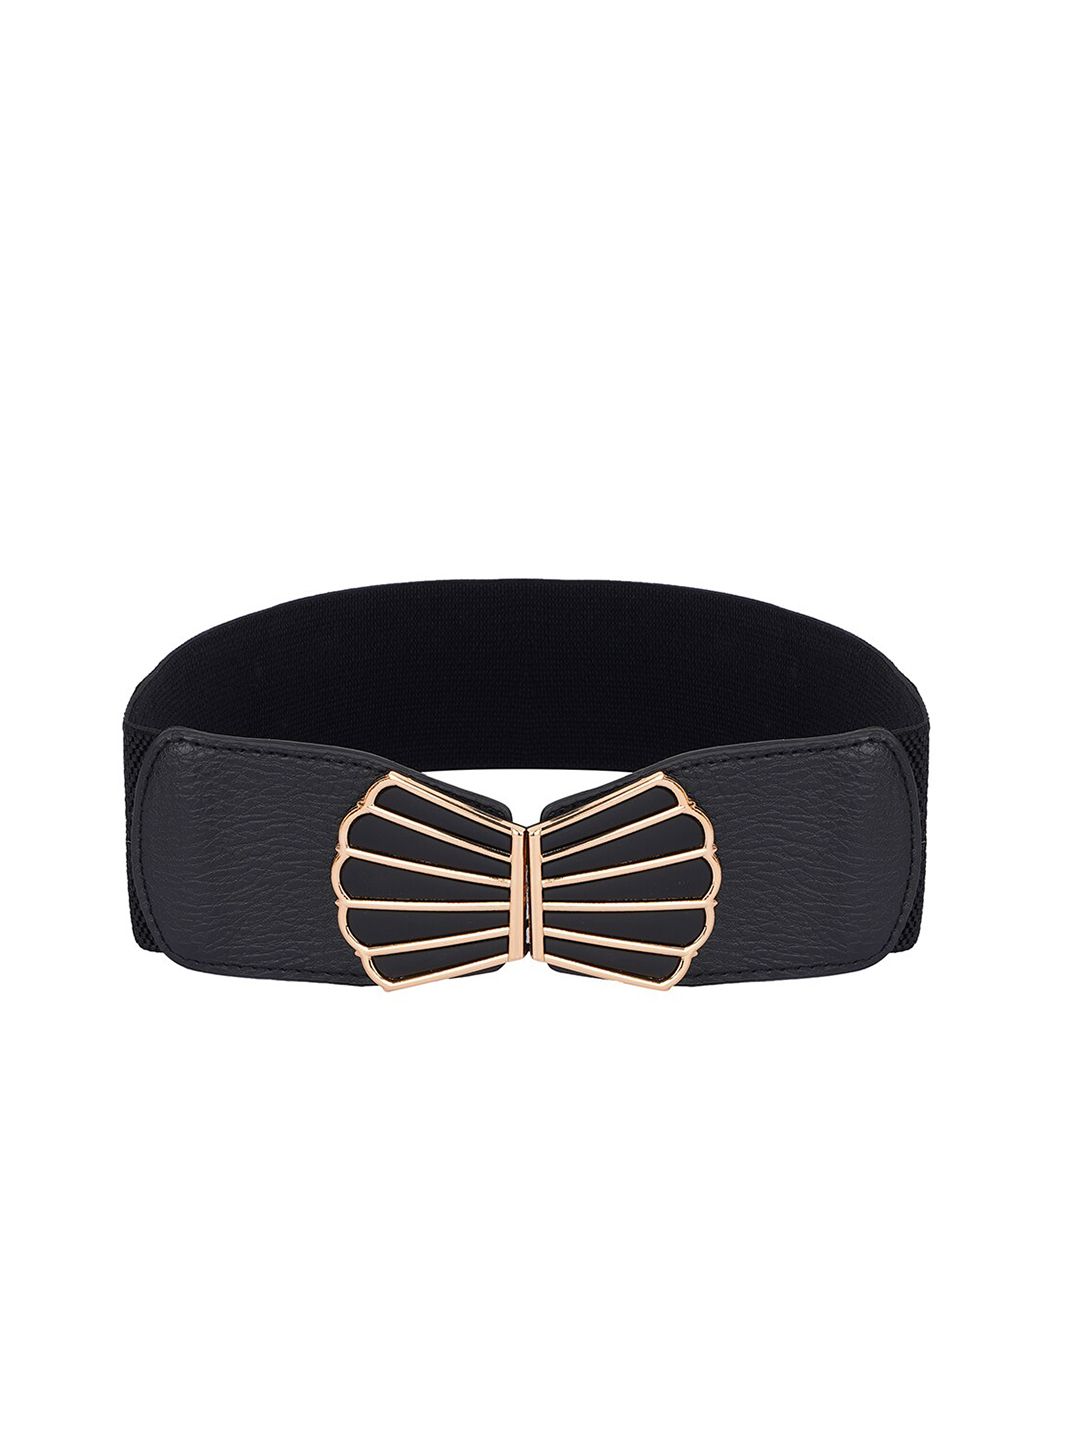 Style SHOES Women Black Textured Belt Price in India